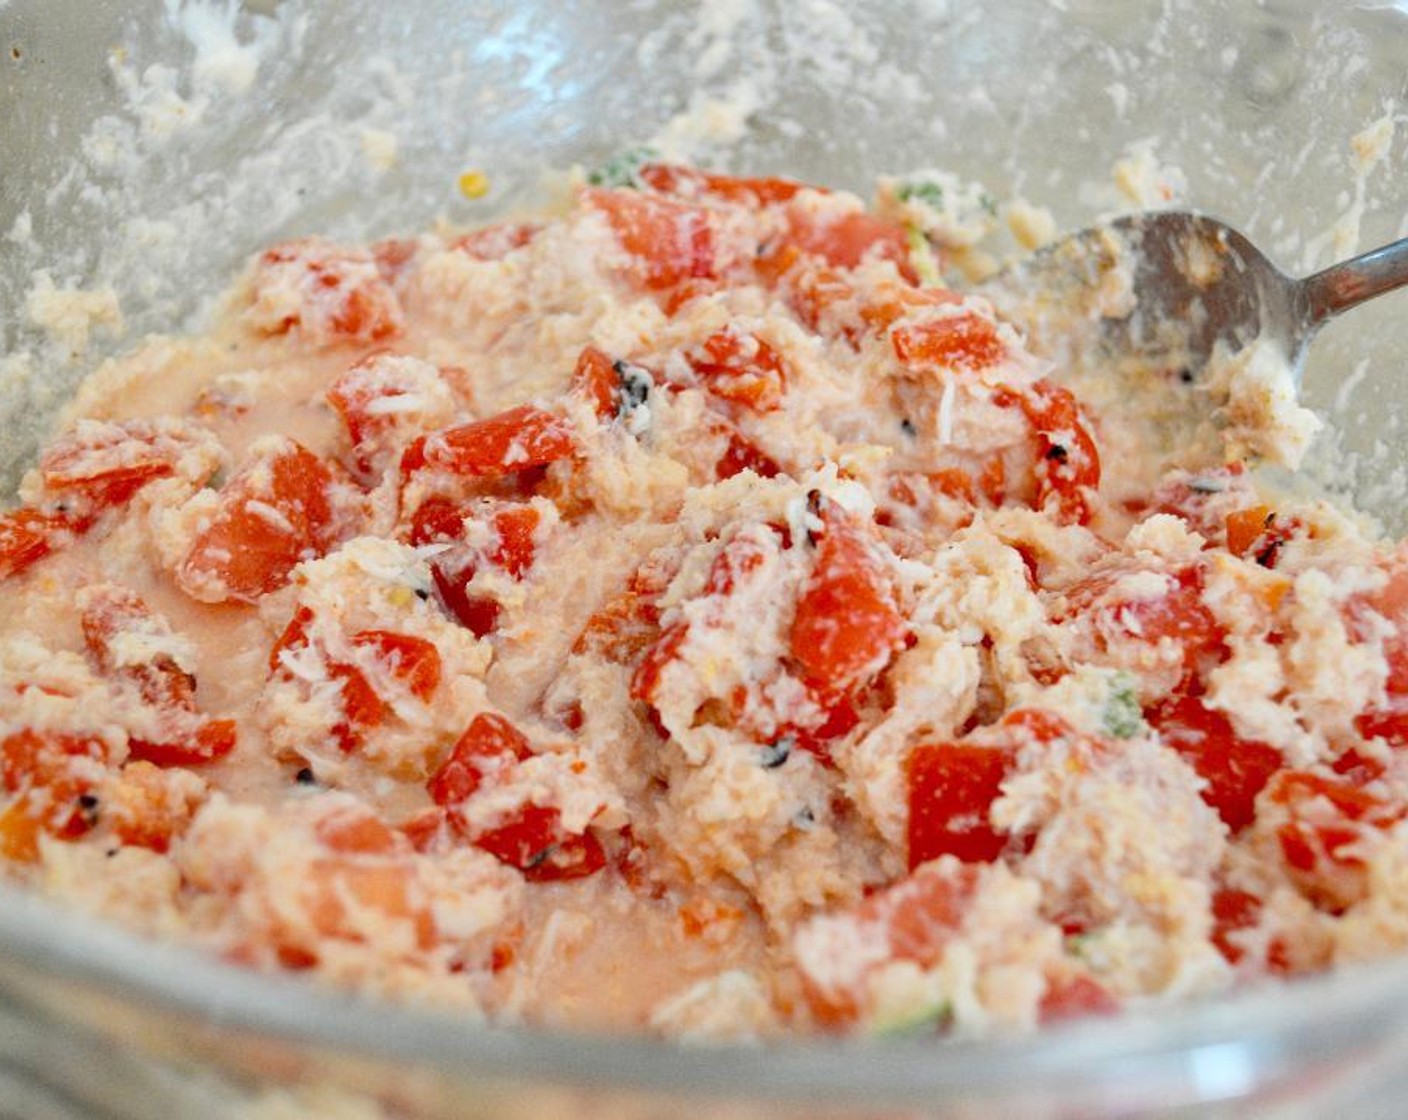 step 5 While they toast, stir the Fresh Crab Meat (1 lb), Jarred Roasted Red Peppers (1 jar), Tomato (1), Fresh Basil Leaves (6), Crème Fraîche (1/3 cup), Old Bay® Seasoning (1/2 tsp), and Salt (1 pinch) together in a bowl thoroughly.